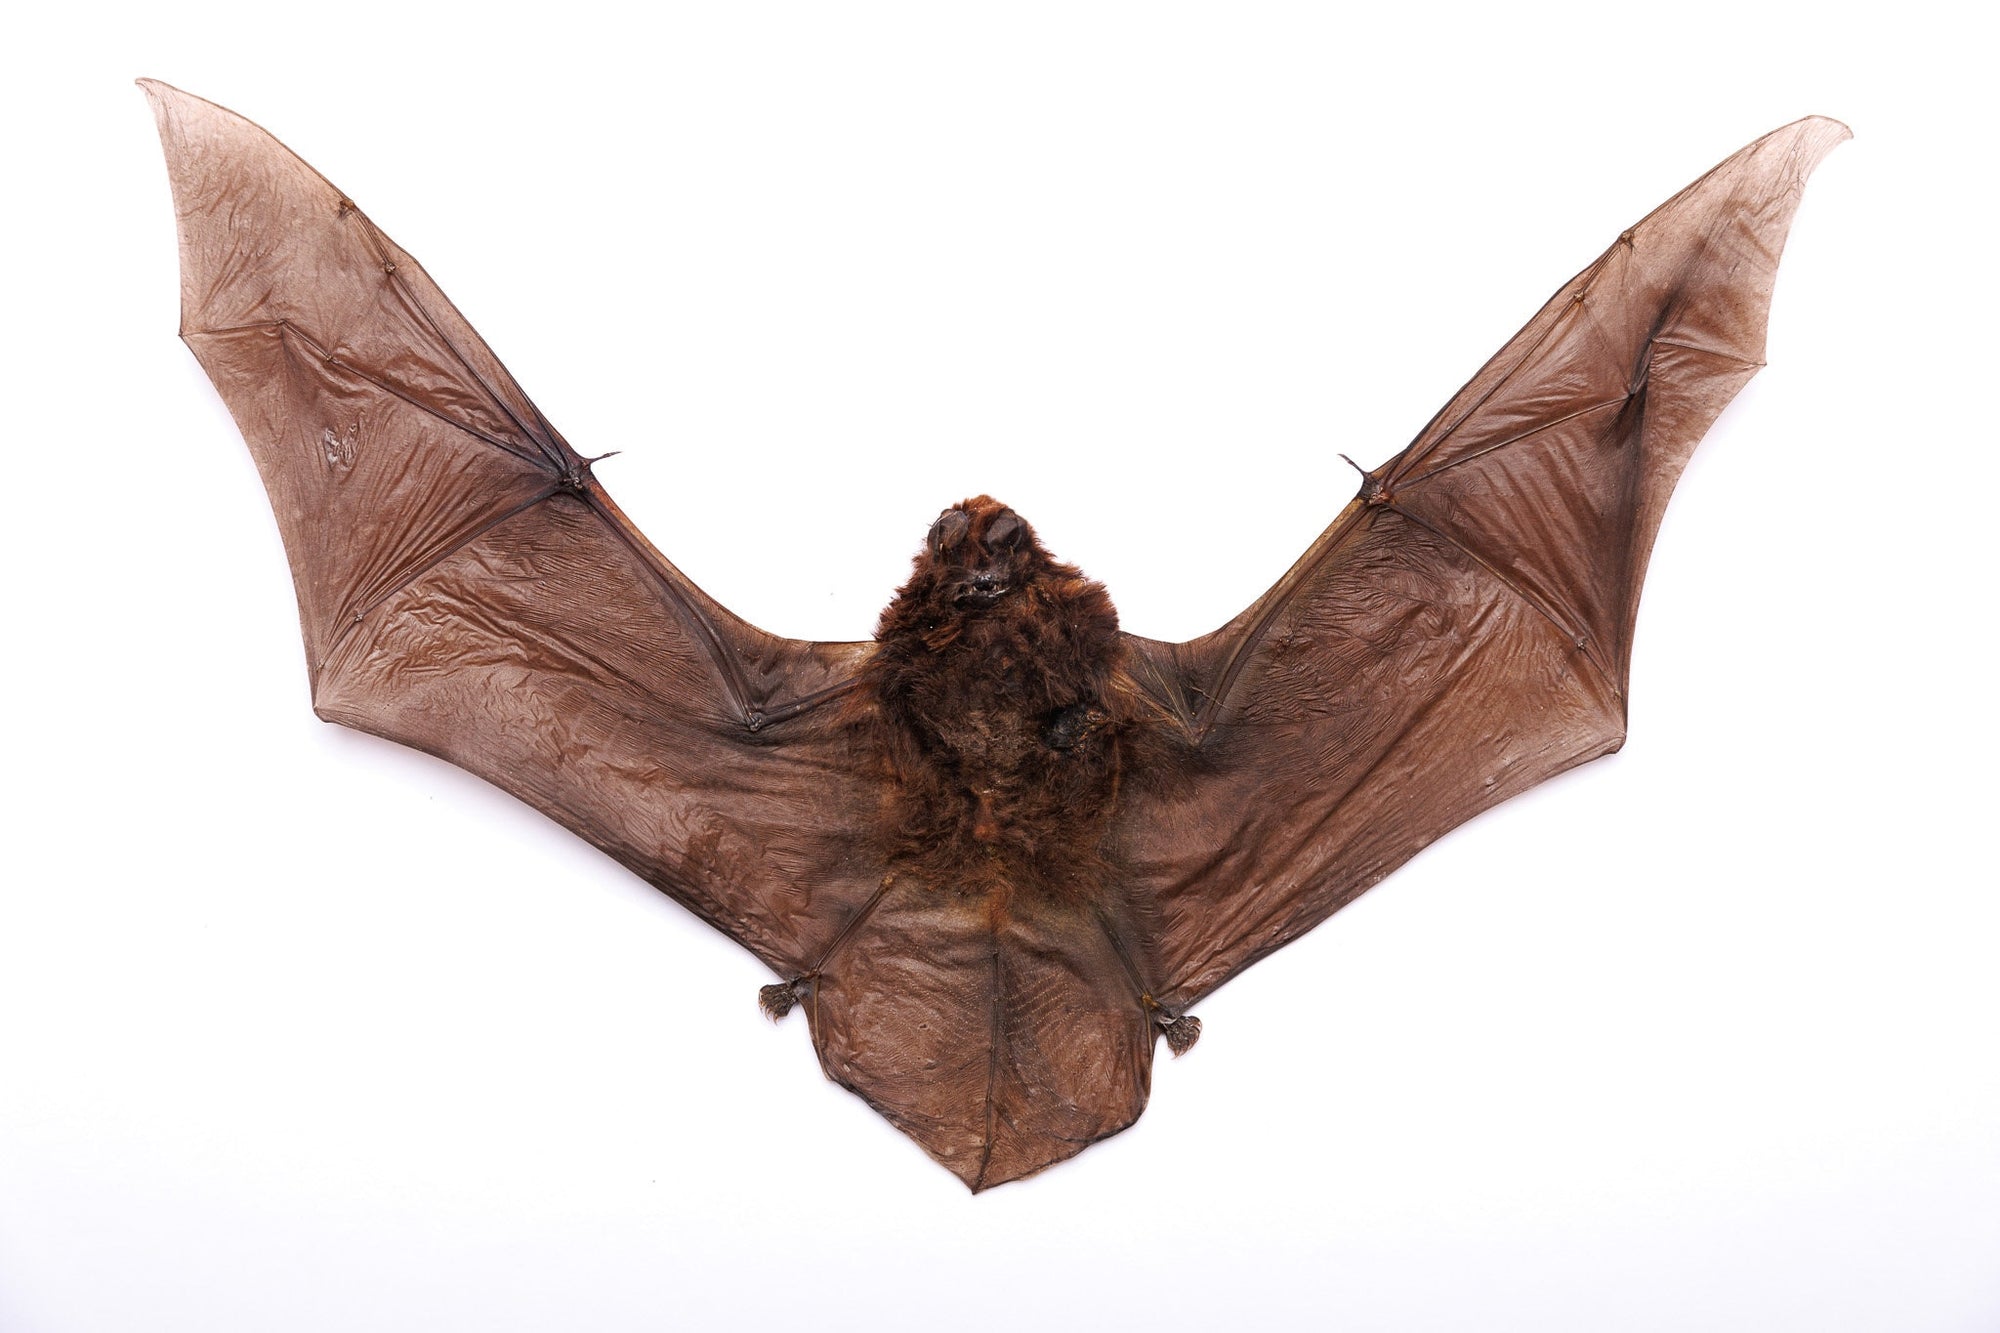 FOUR (4) Long-Fingered Bat (Miniopterus medius) | A1 Fine Quality Spread-Specimen | Dry-Preserved Clean Taxidermy (NON-CITES)